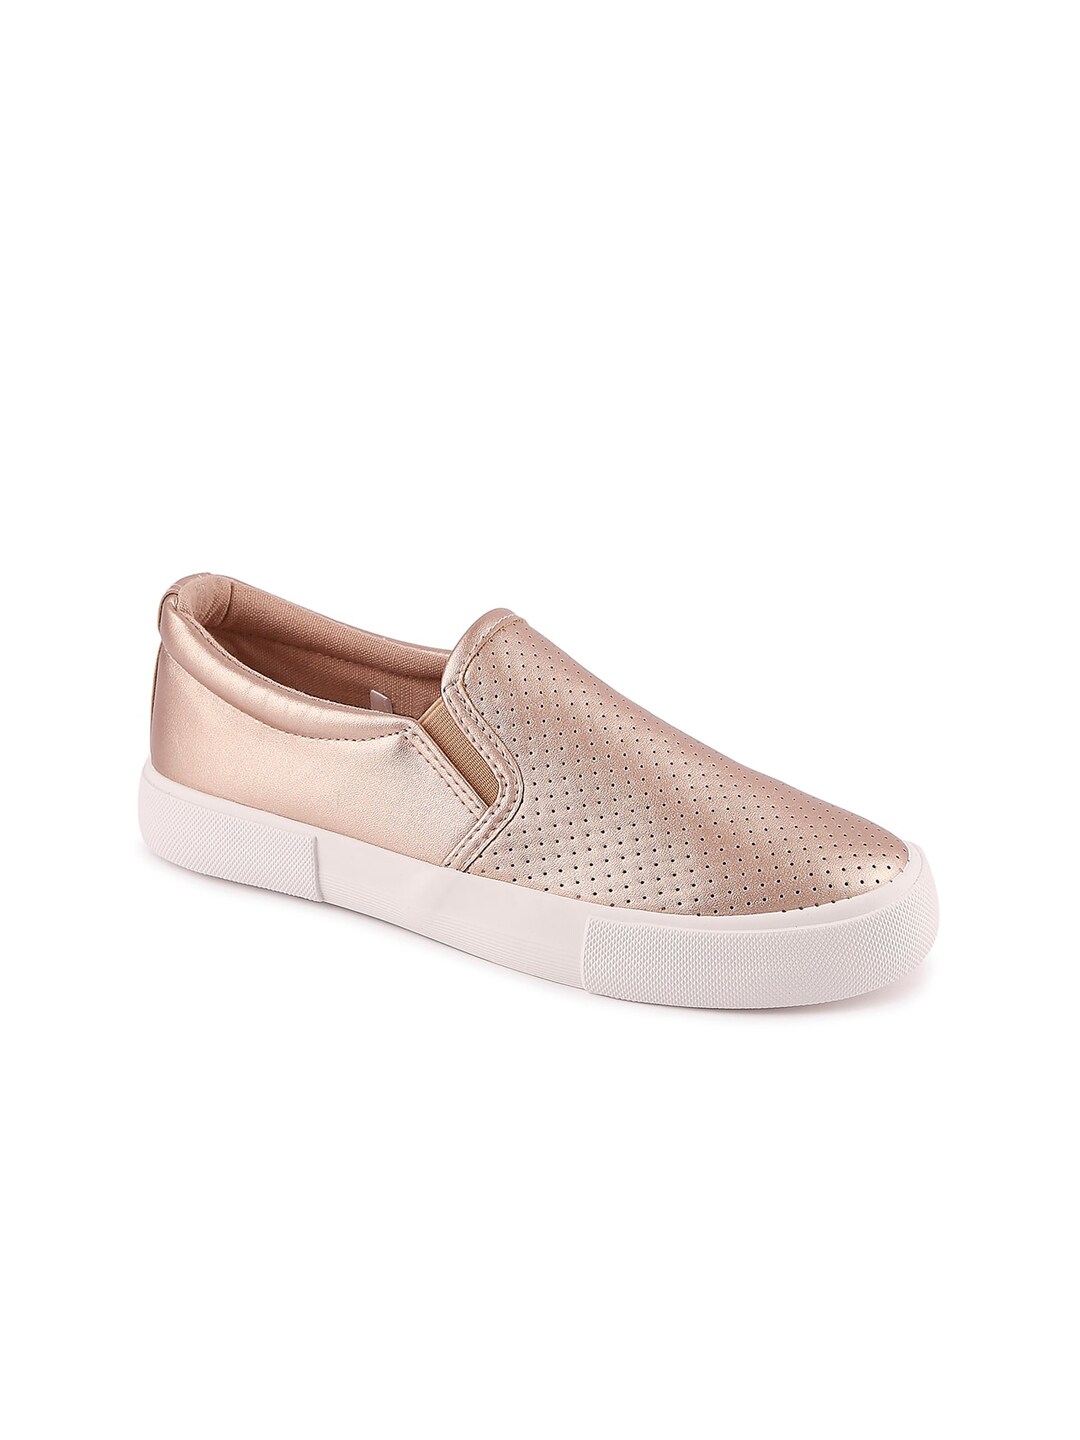 Forever Glam by Pantaloons Women Gold-Toned Perforations Leather Slip-On Sneakers Price in India